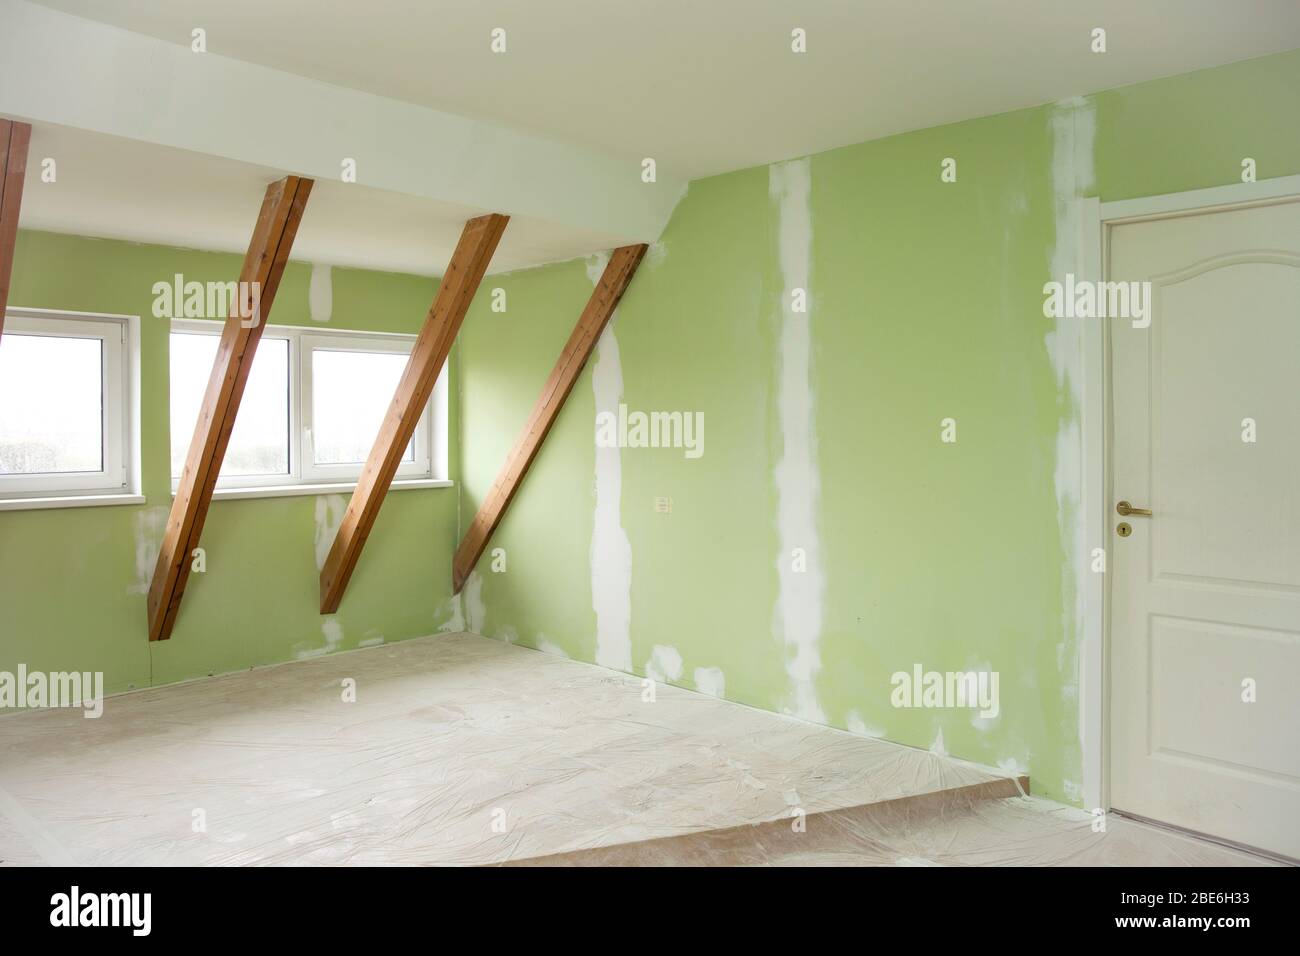 Home renovation work in progress. Repairing old green wall cracks in wall with white new putty. Home renovations concept. Stock Photo